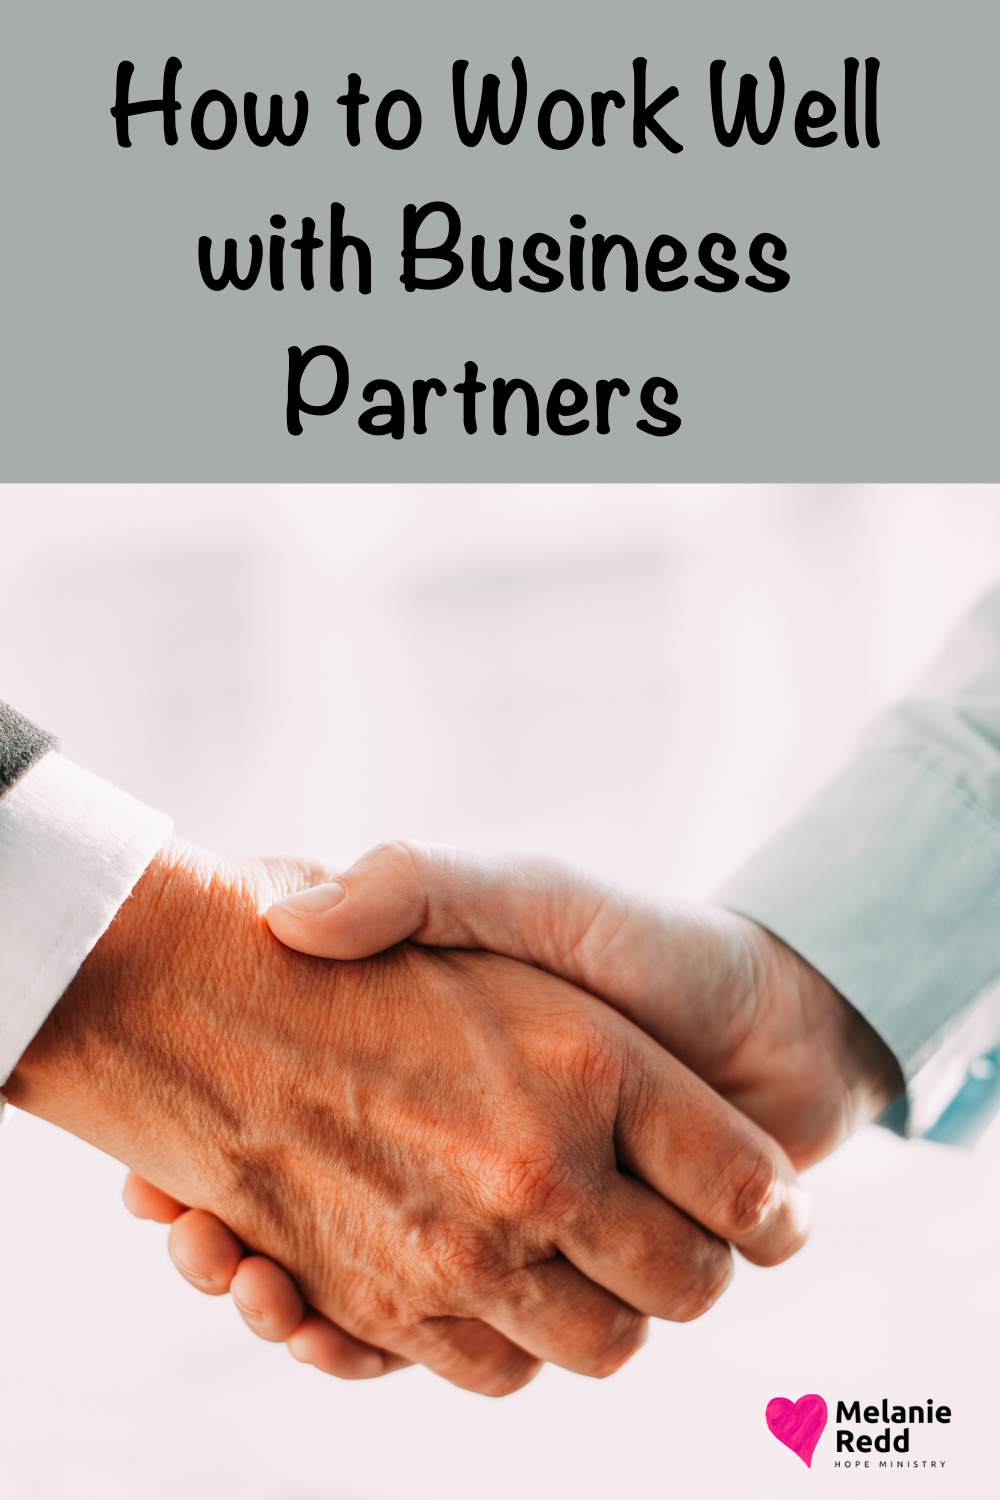 Most of us have business partnerships and collaborations. Good set up is a must. Here is how to work well with business partners.